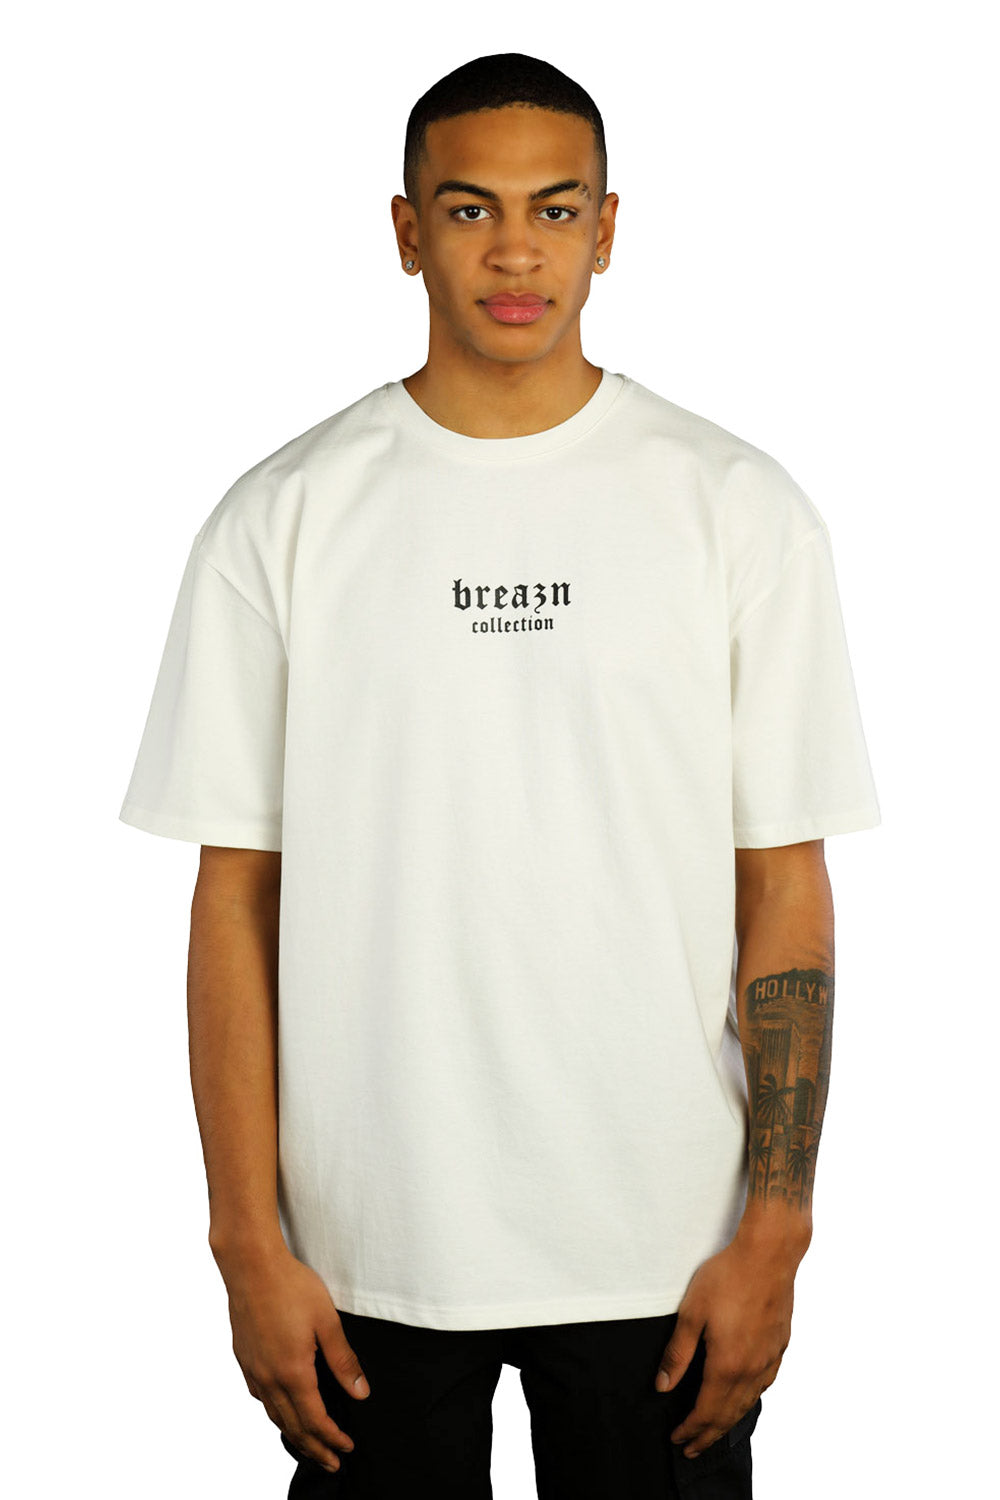 Front Print T-Shirt (white) Breazn Collection –